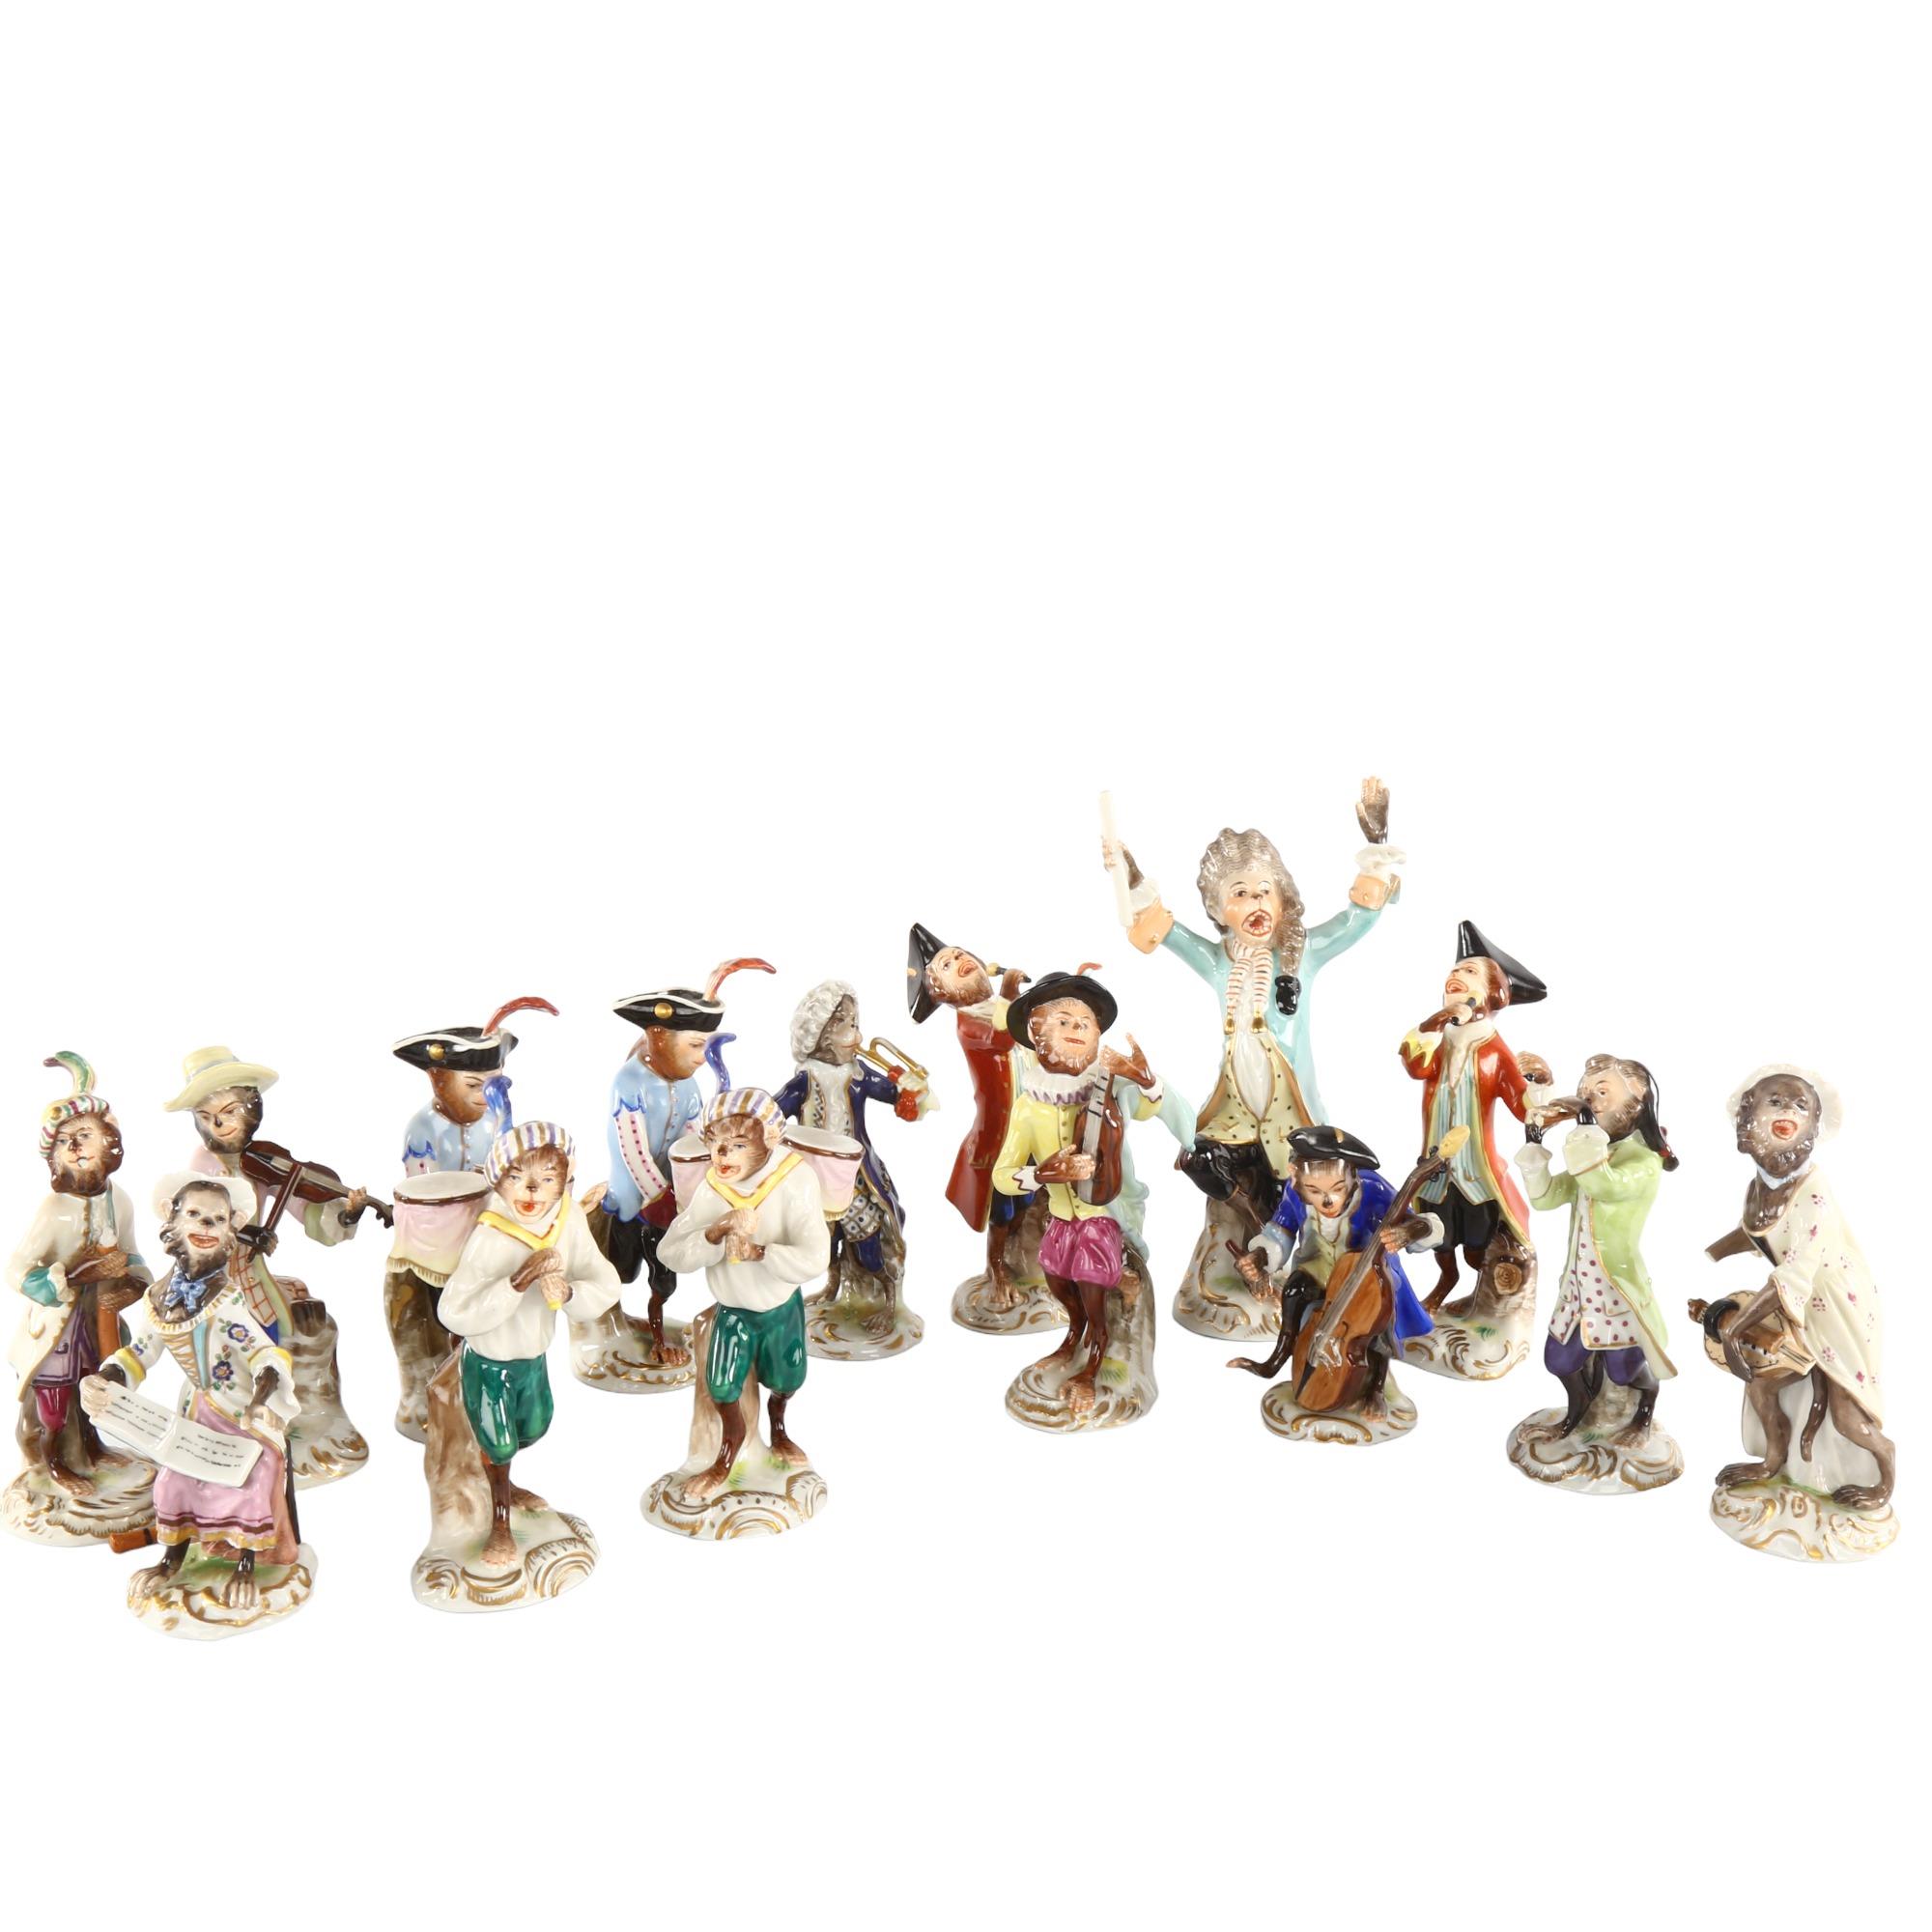 A collection of early 20th century German Volkstedt porcelain monkey band figures, largest height